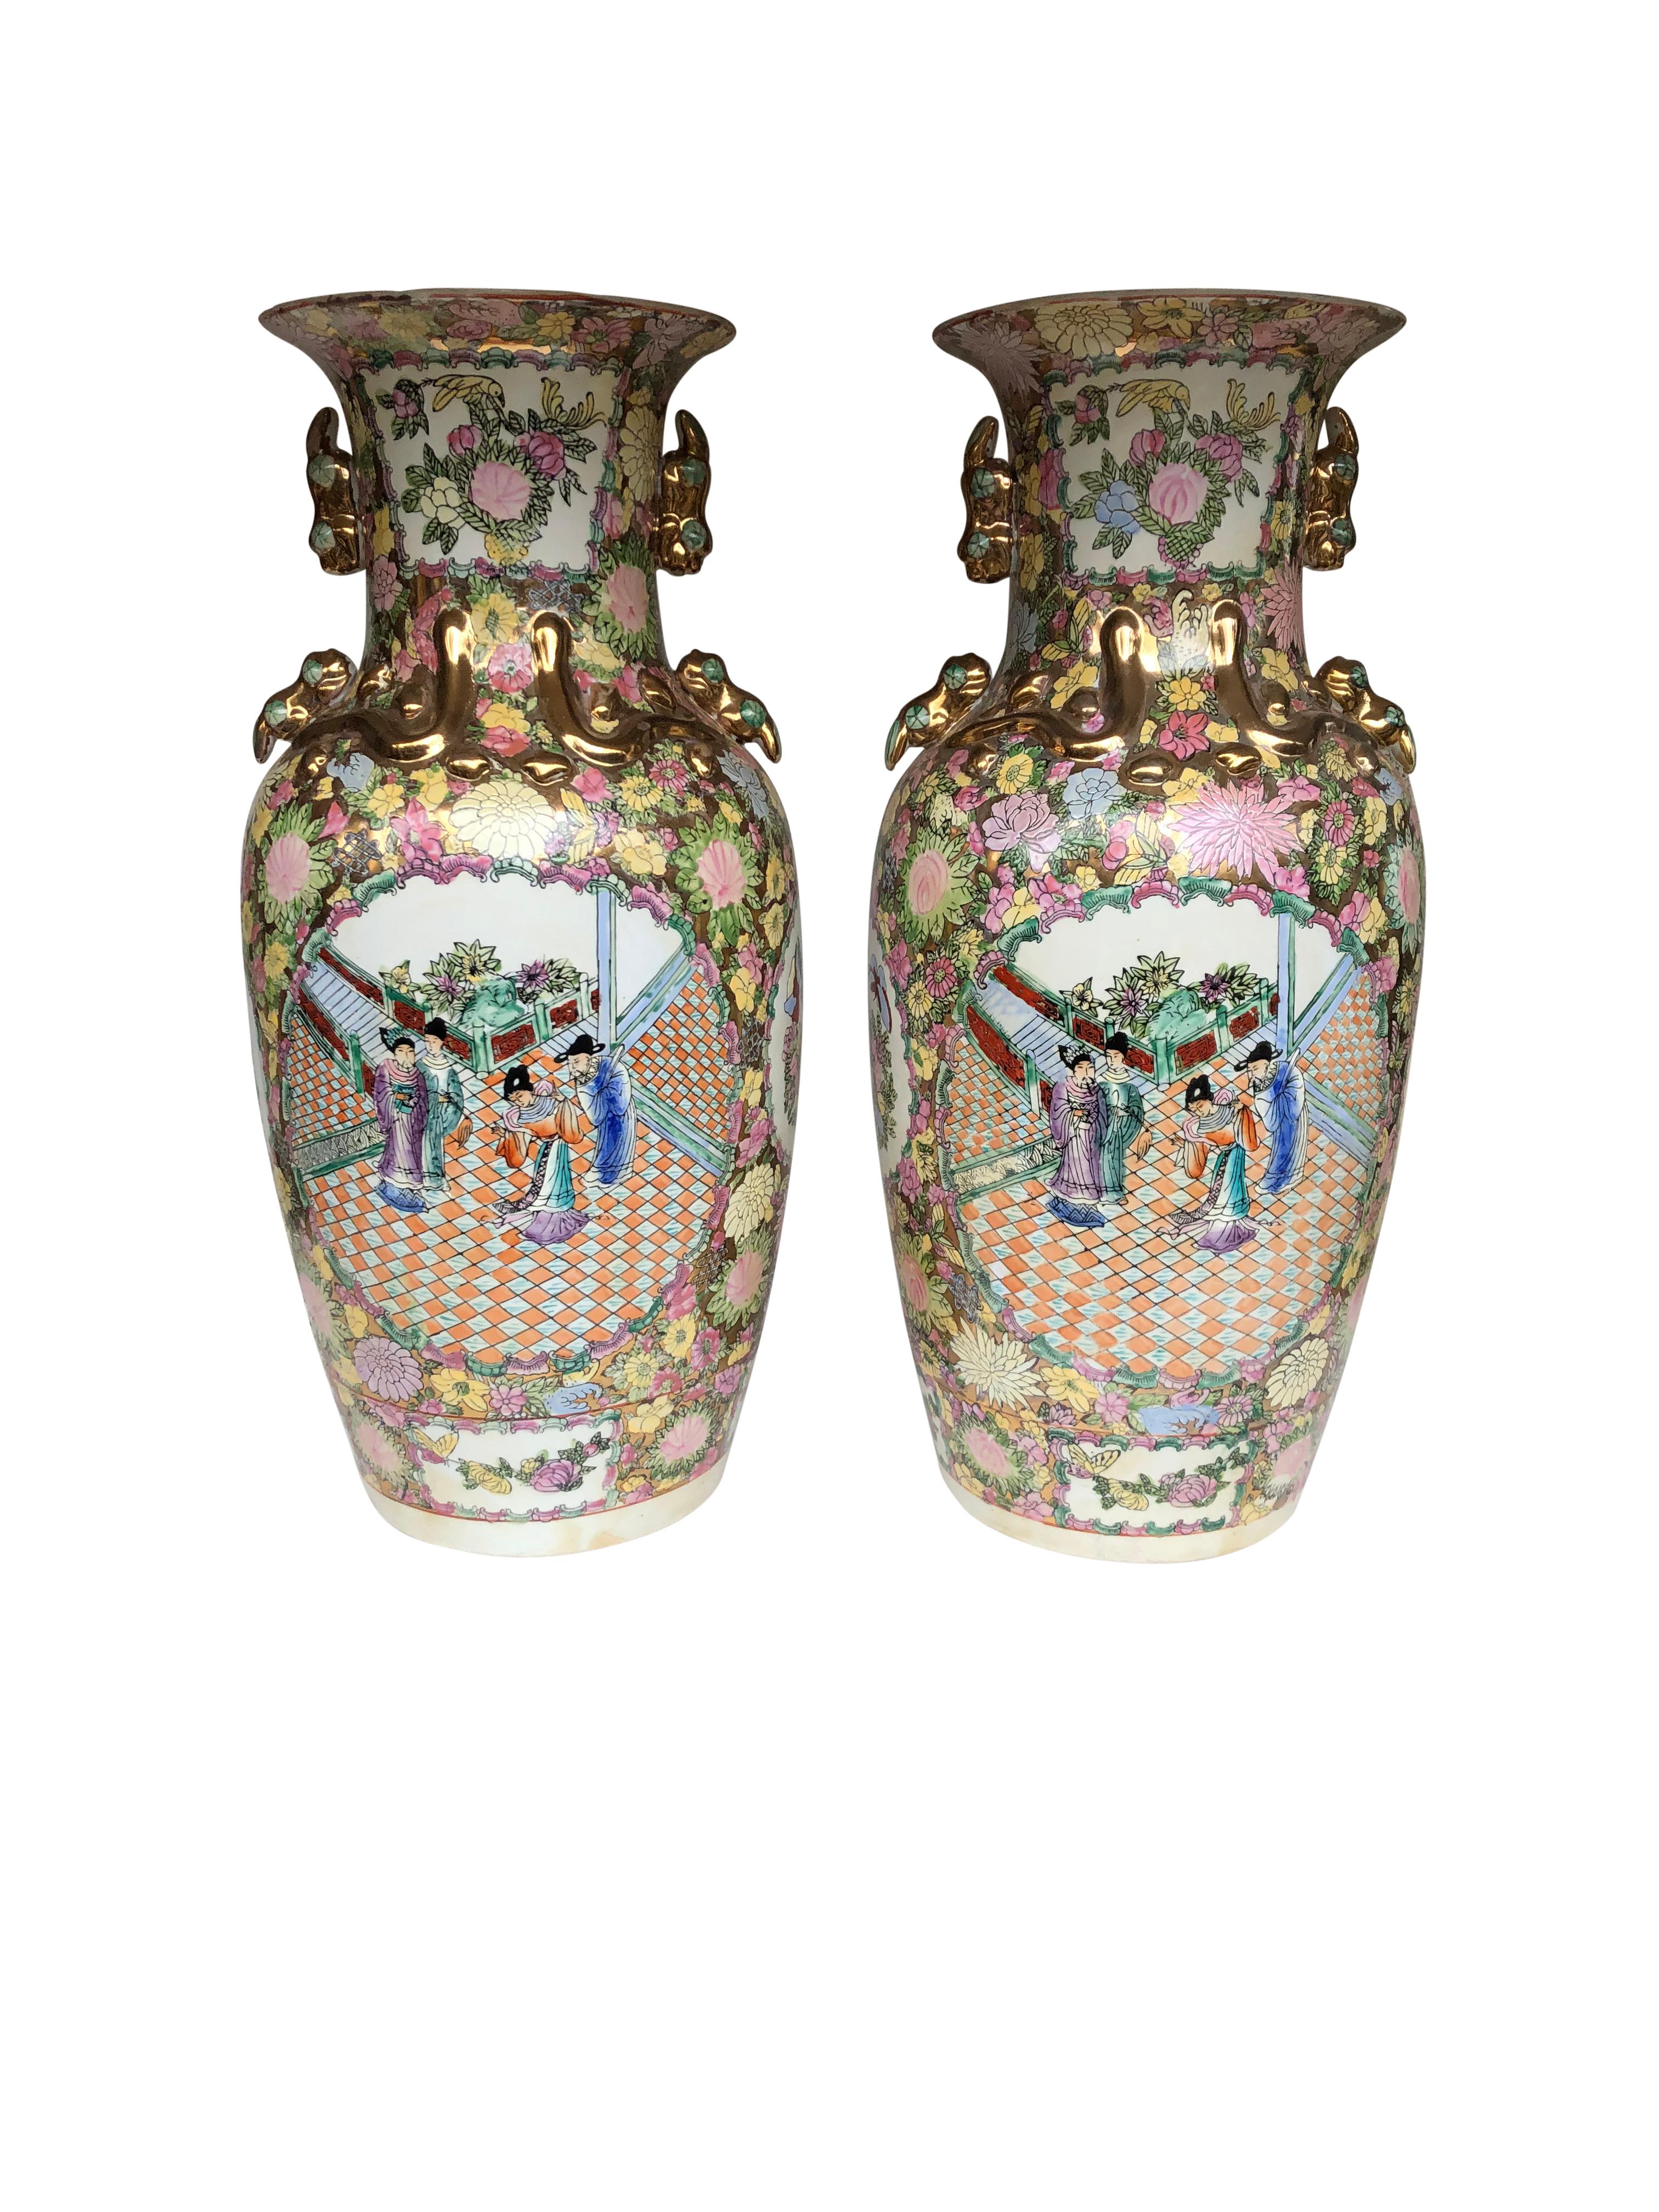 A pair of large China vases, 20th century. Detailed with matching garden scenes and floral decorations. Offered in excellent condition.